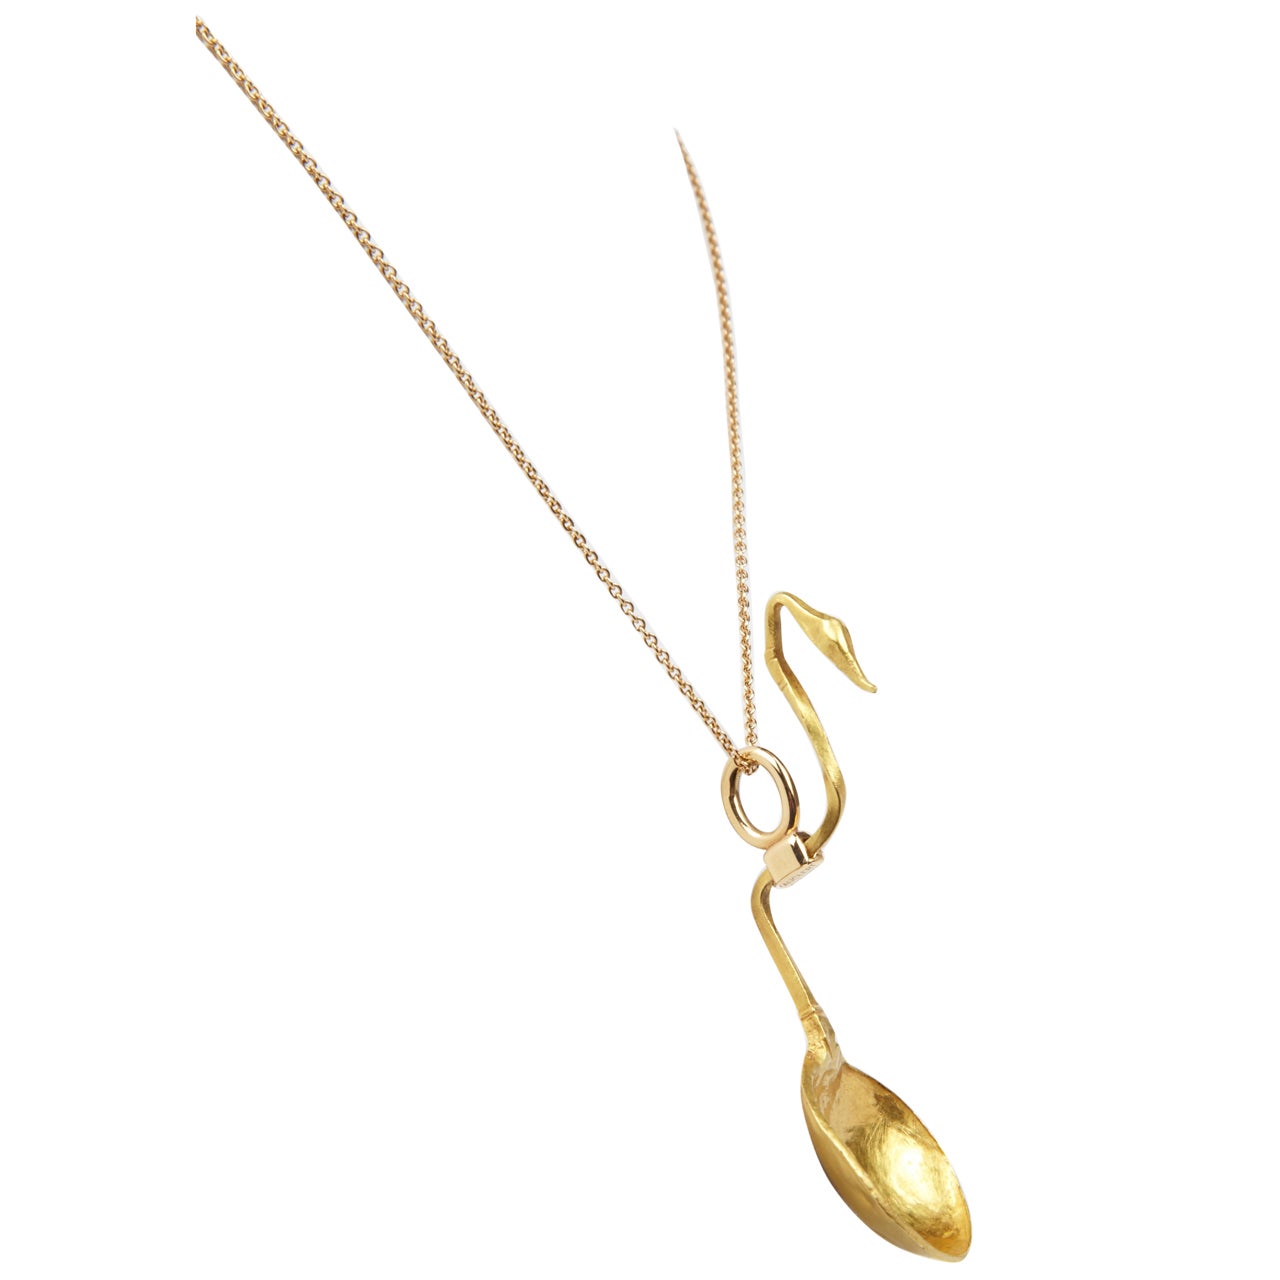 Antique Roman Gold Spoon Pendant On Its Chain For Sale